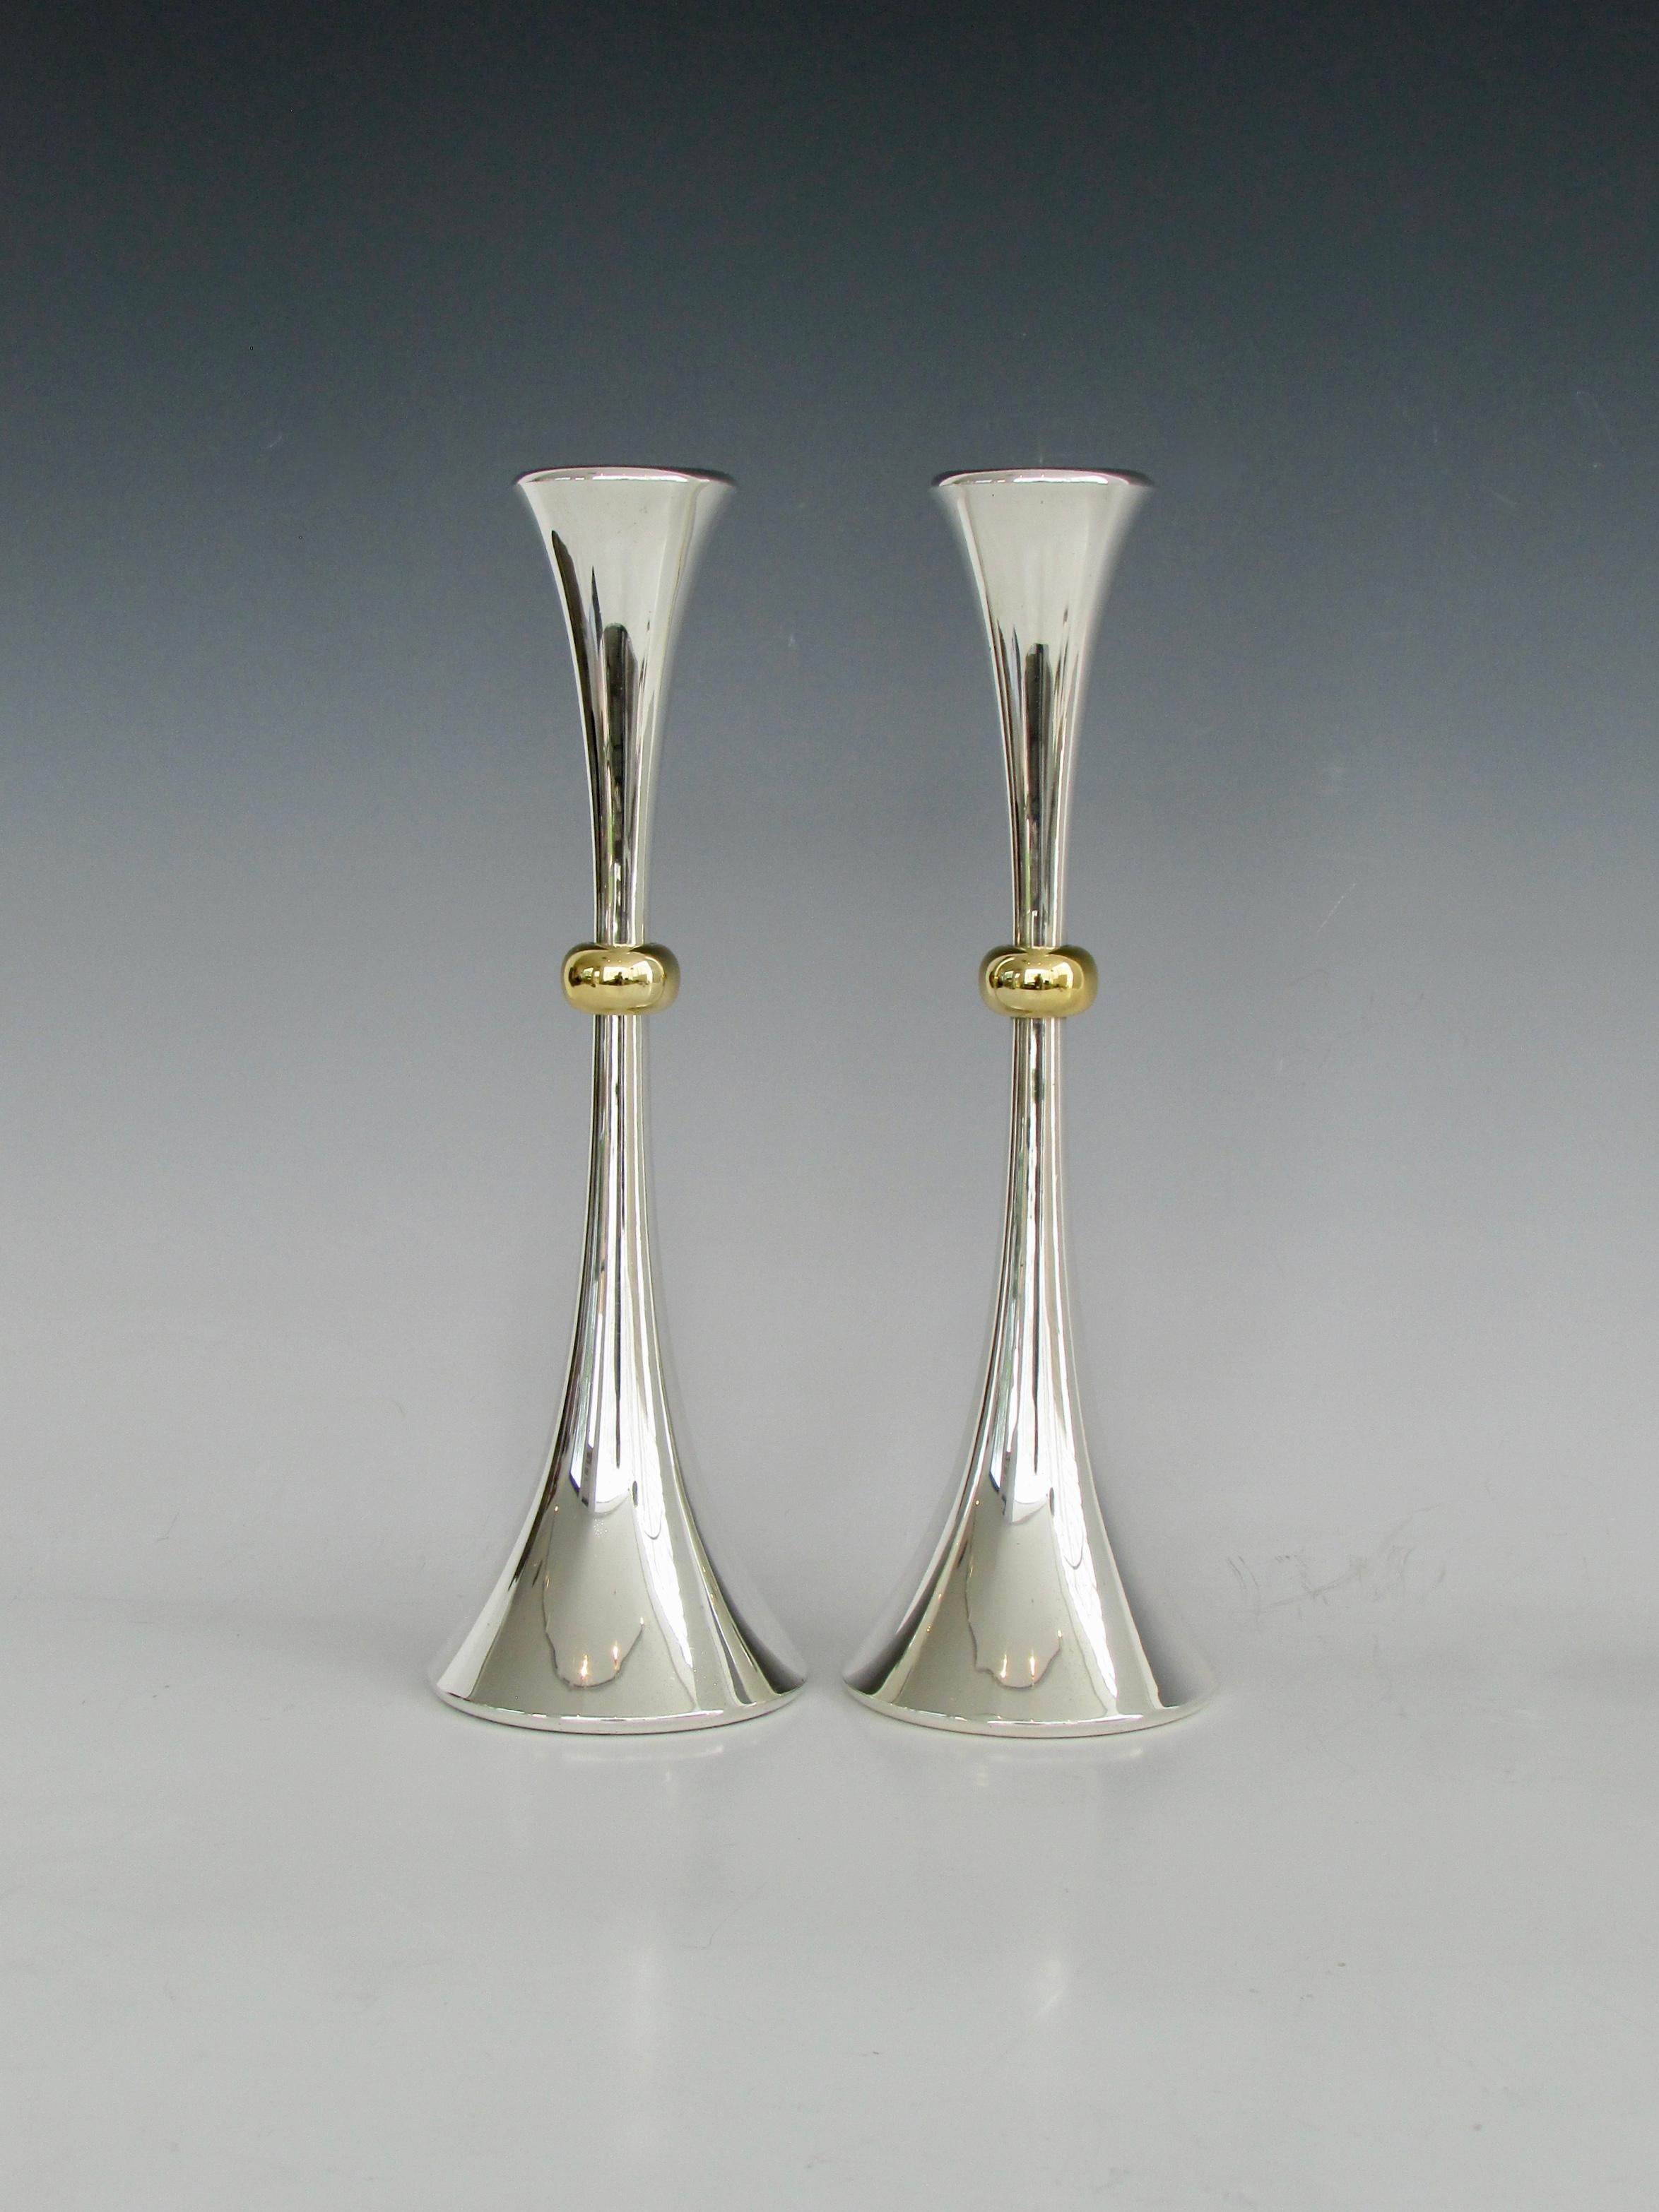 A modernist trumpet shaped candlestick pair designed by Jens Quistgaard for Dansk Designs in silver plate with a brass collar. Dansk Designs JHQ Japan labels on underside. Good condition.